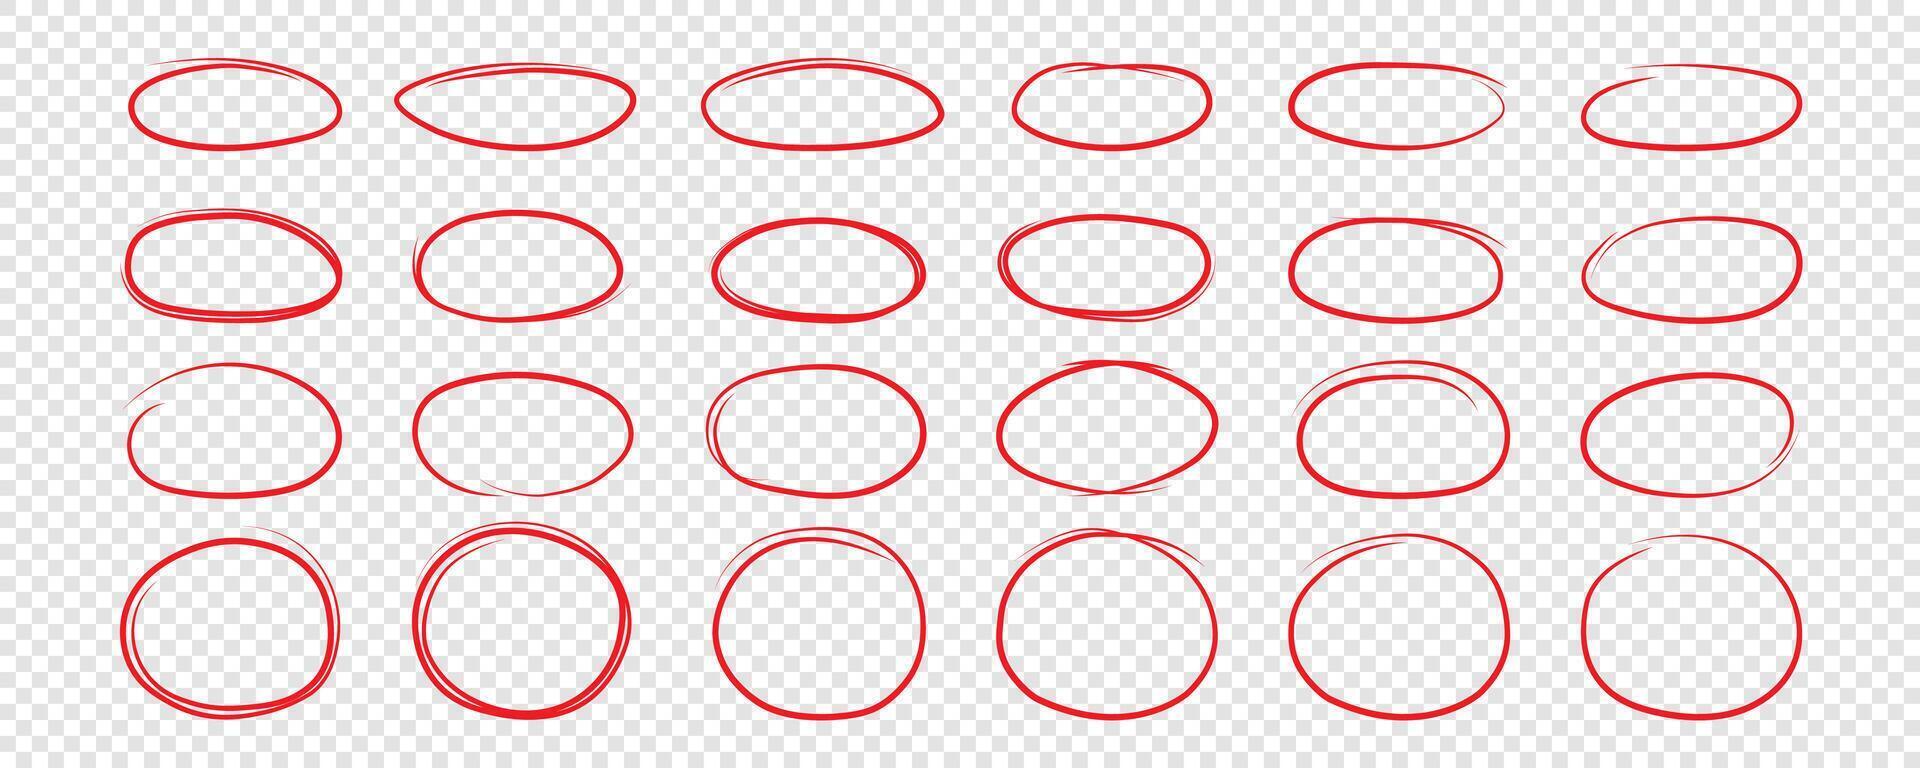 A set of hand-drawn circles.  Circle scribbles for passing a note. Circular logo design elements. Graffiti bubble vector illustration drawn in red pencil or pen .